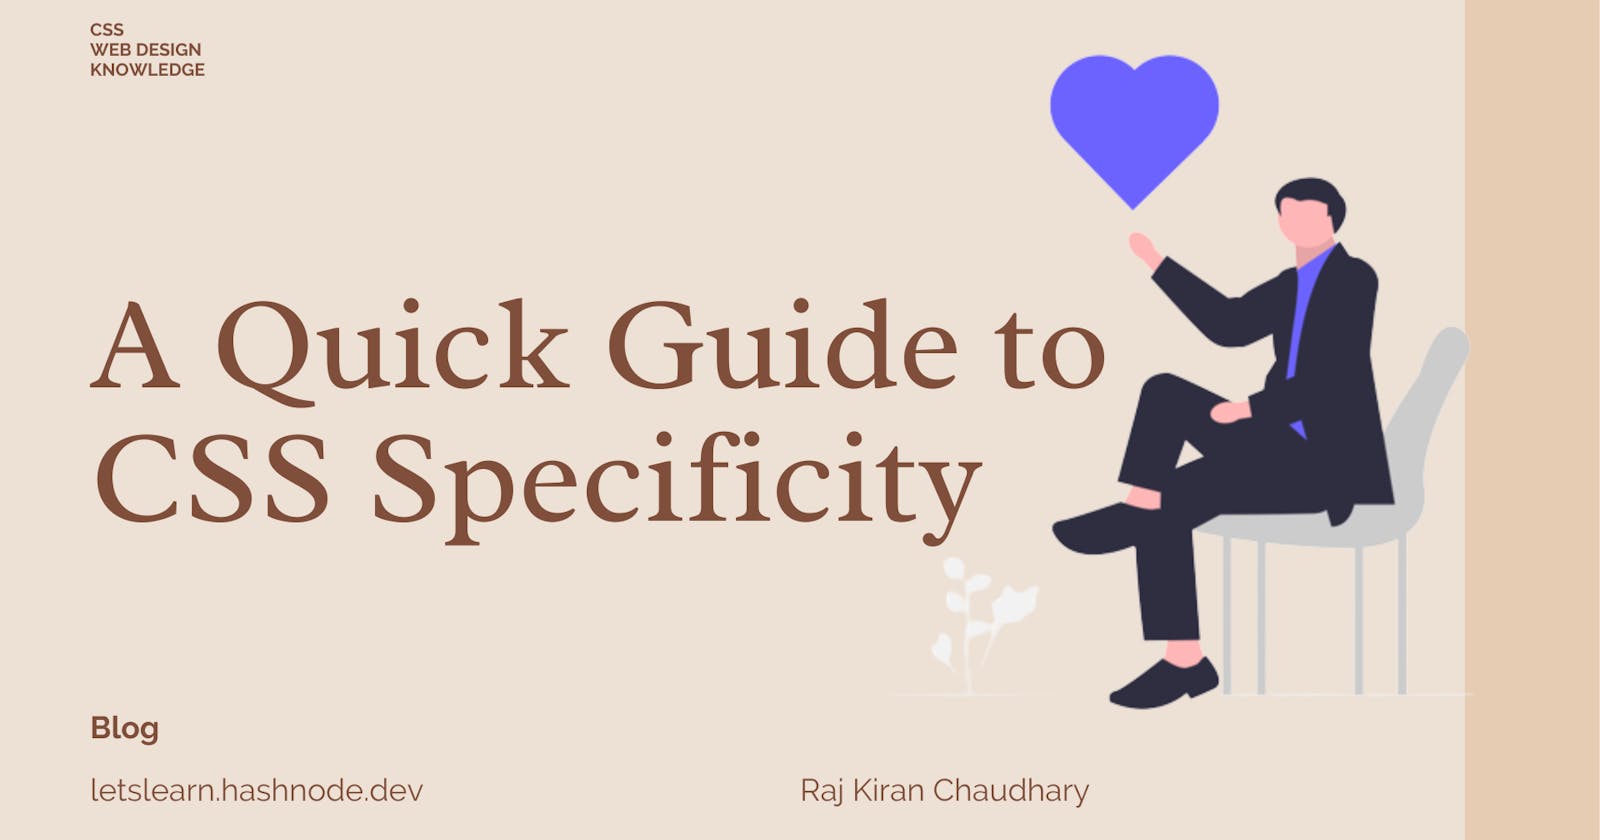 A Quick Guide to CSS Specificity